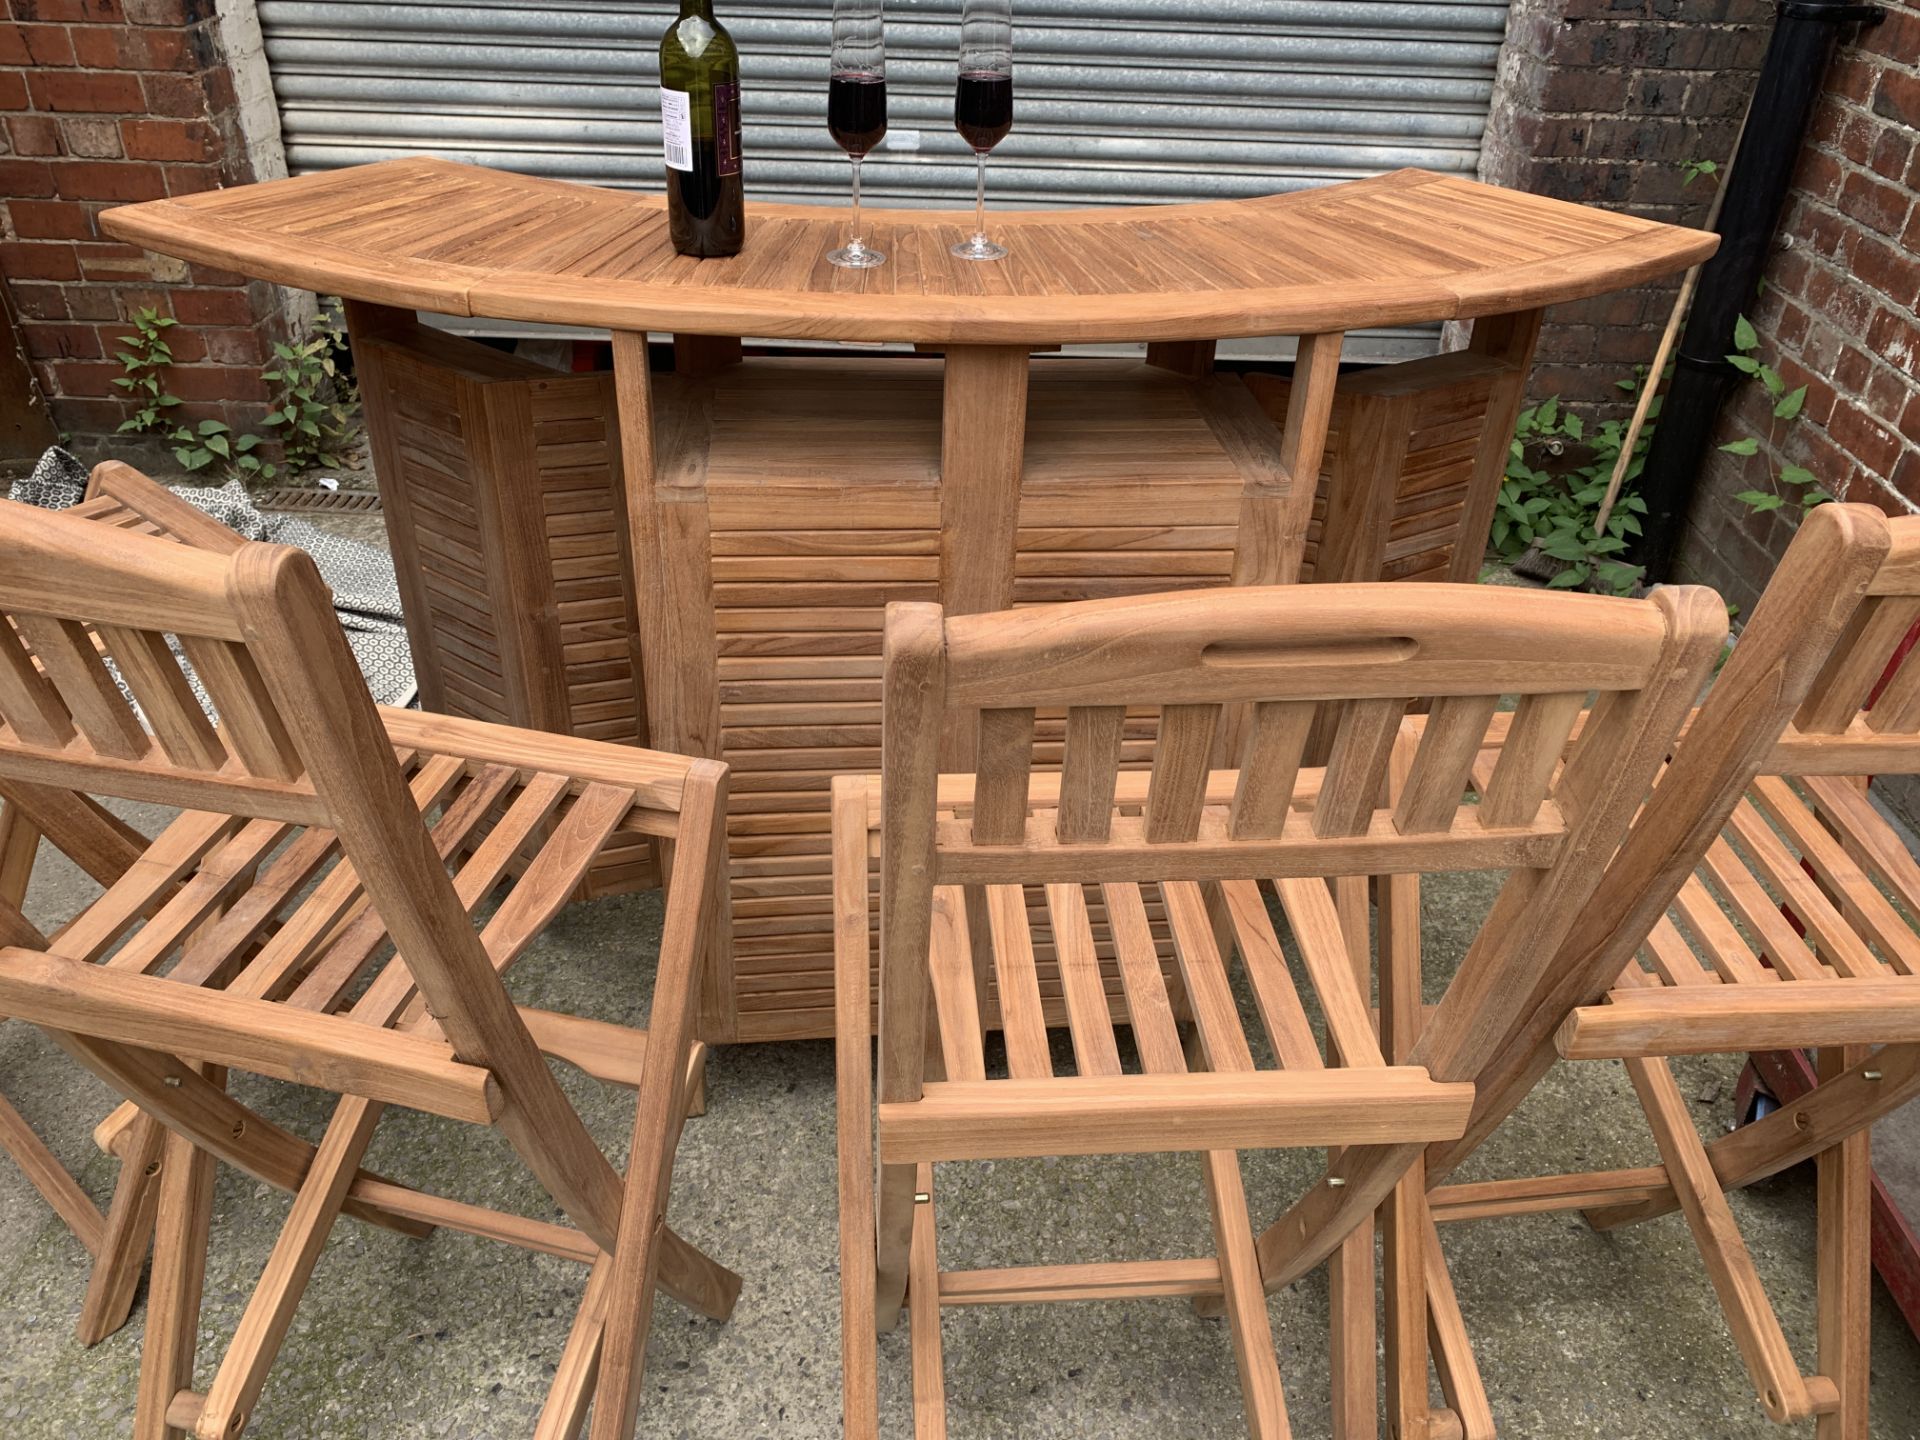 BRAND NEW SOLID WOODEN TEAK FOLDING BAR SET WITH 4 STOOLS 176 X 40 X 108 RRP £2995